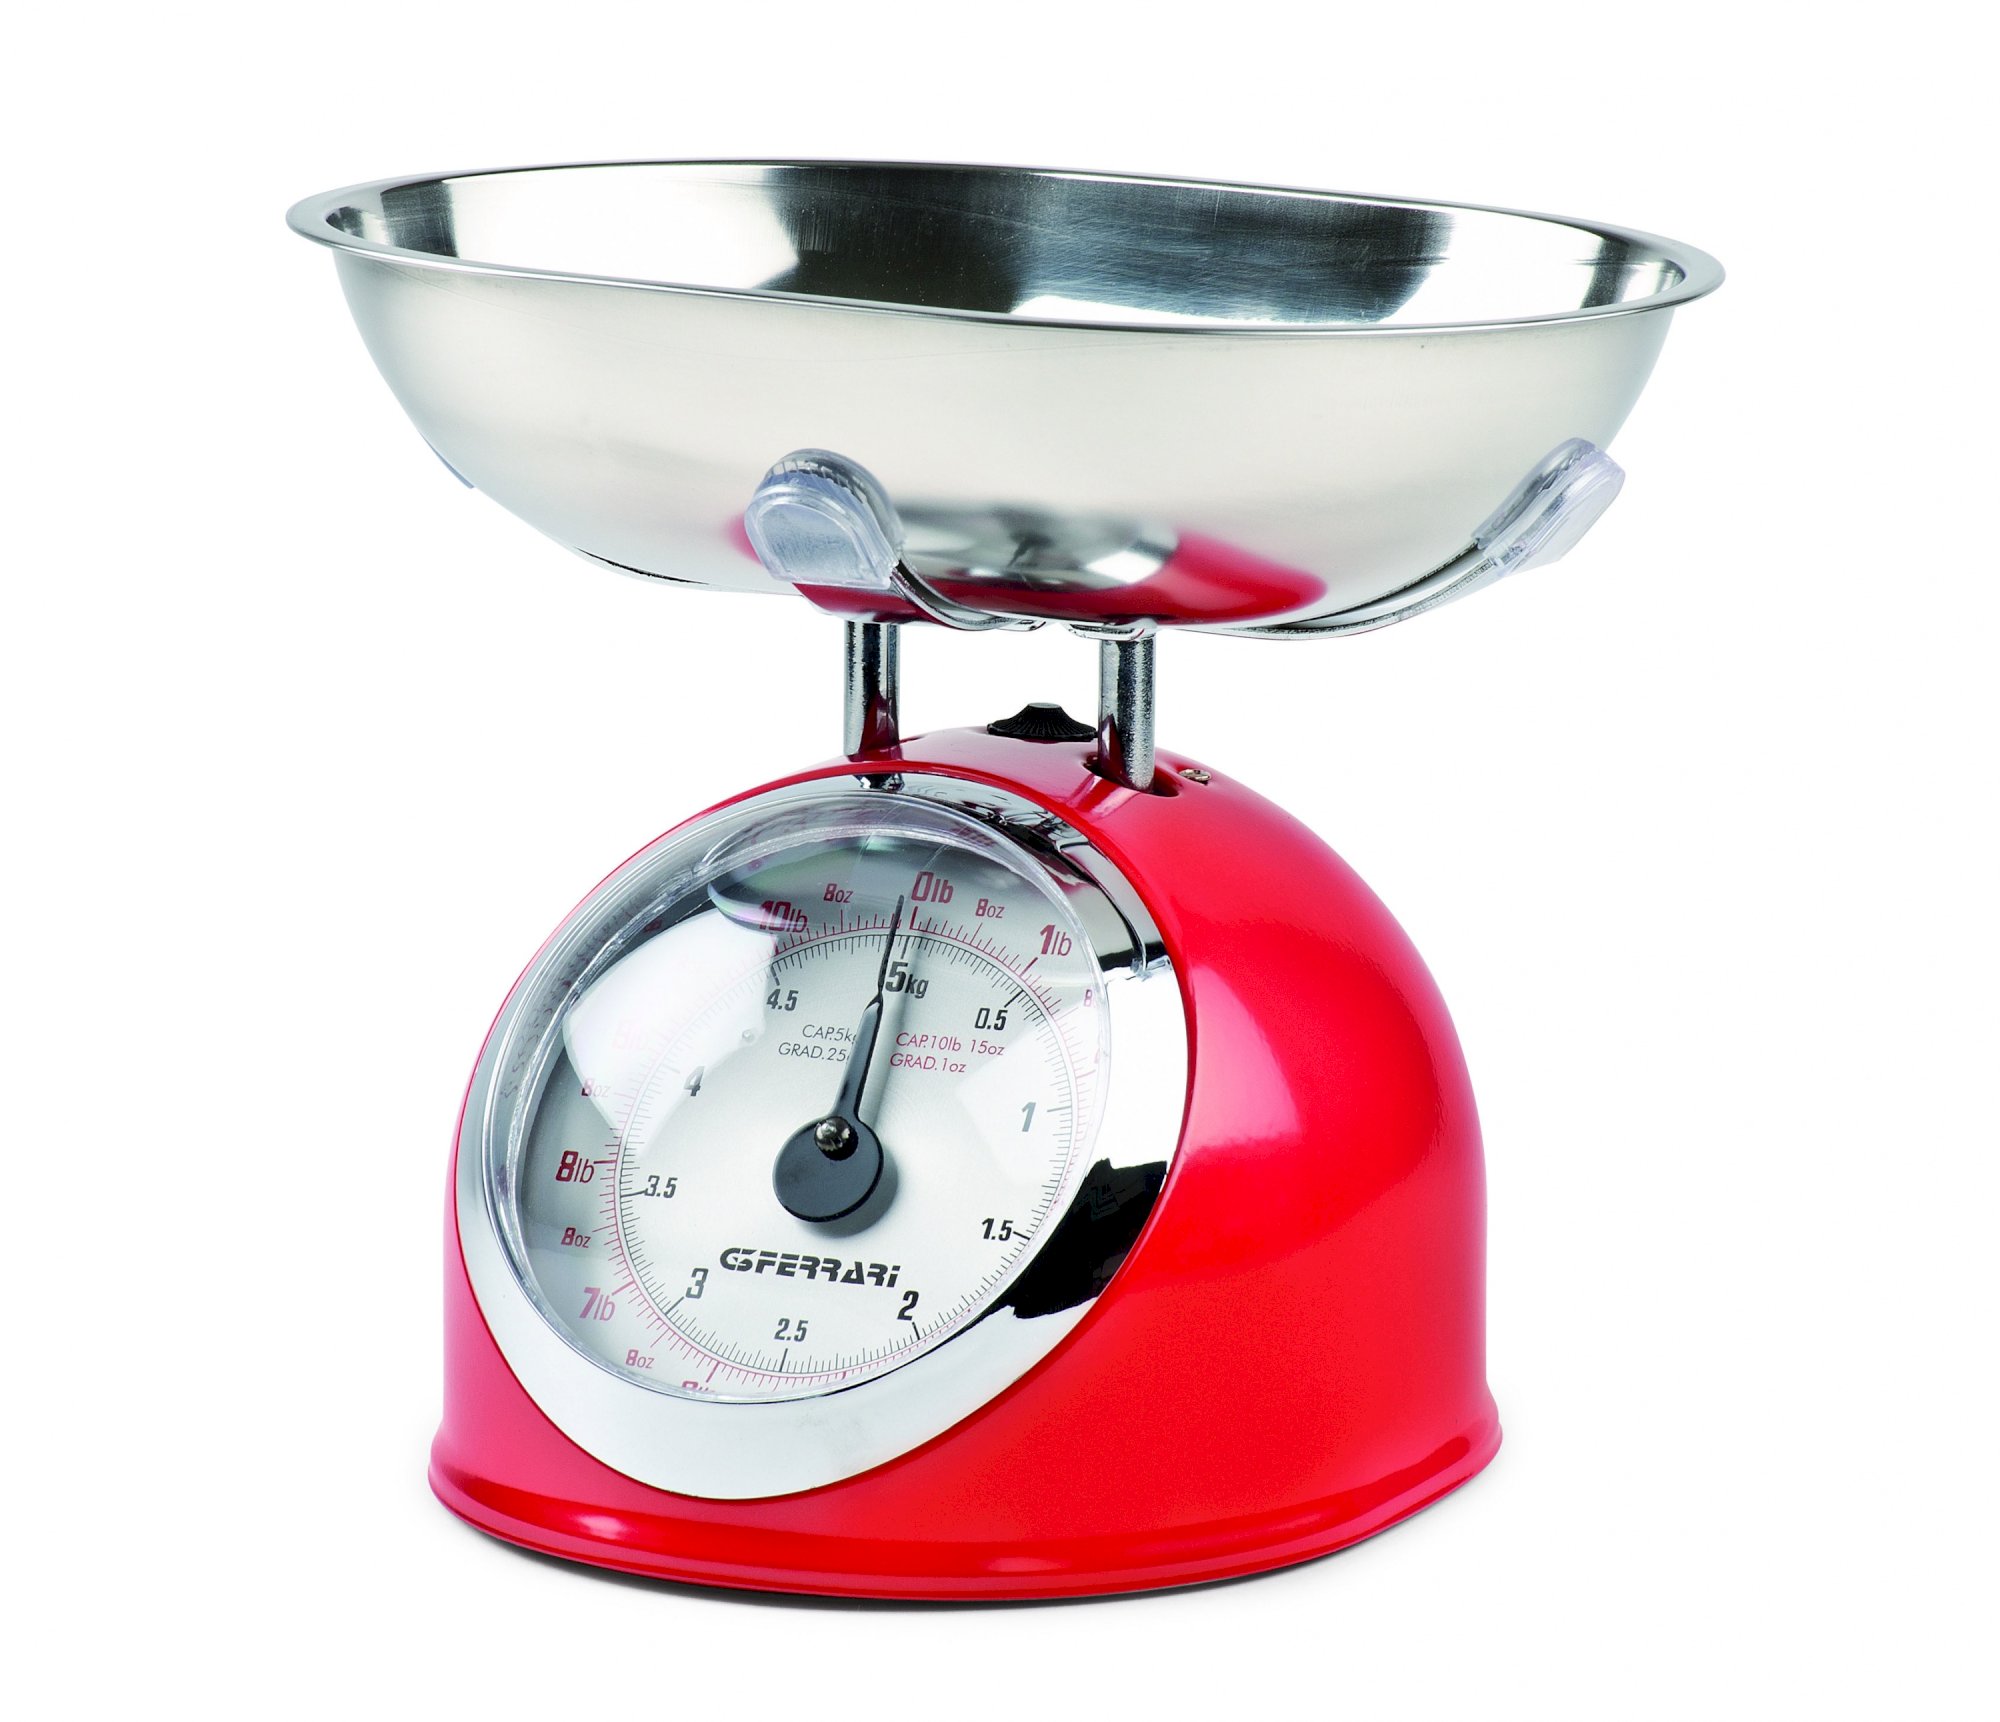 G2000302, Aska, mechanical kitchen scale, red